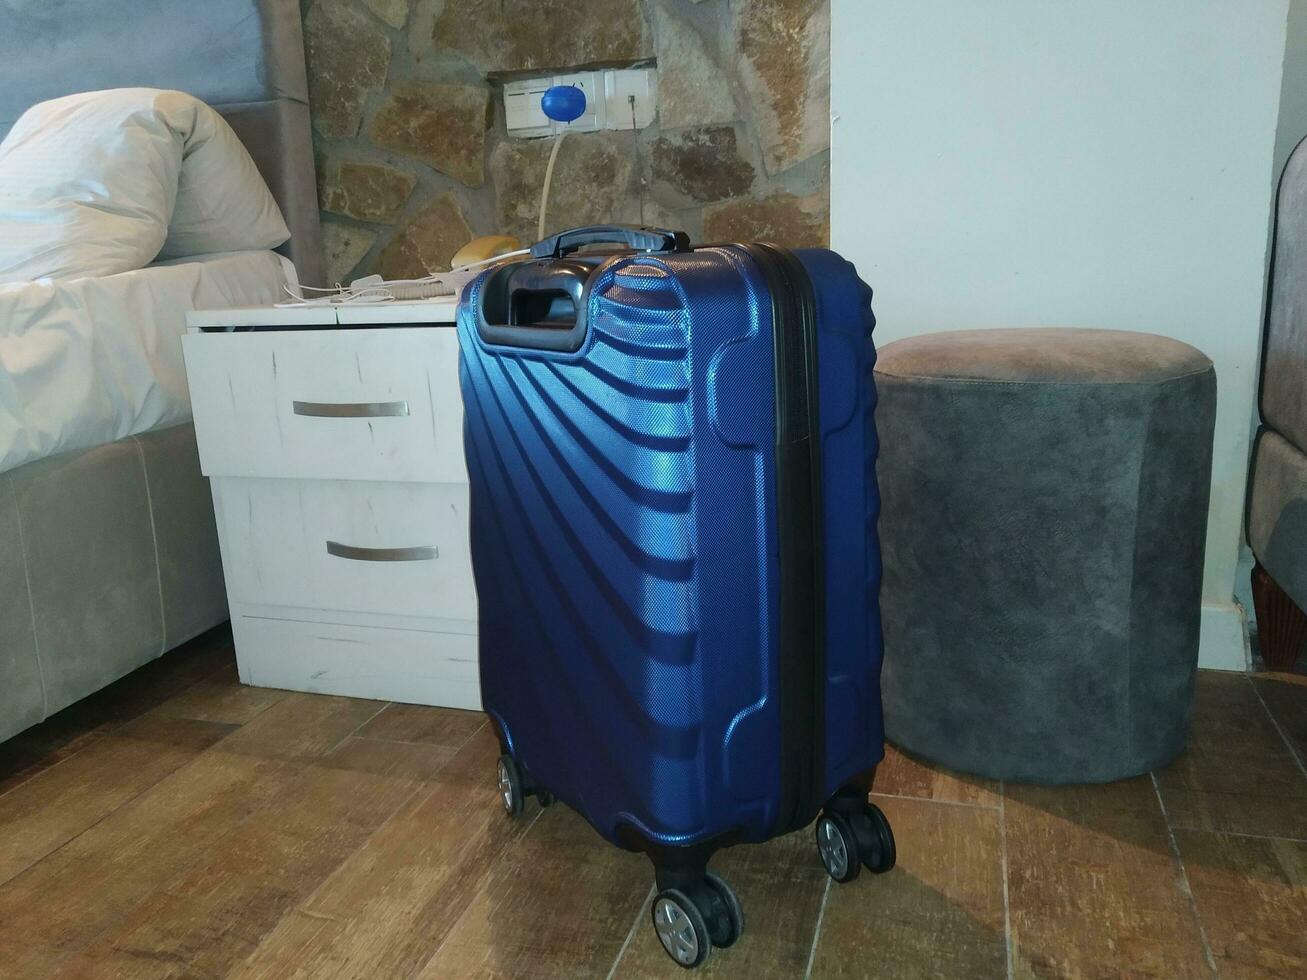 Luggage in the hotel room, ready to travel. Travel concept photo